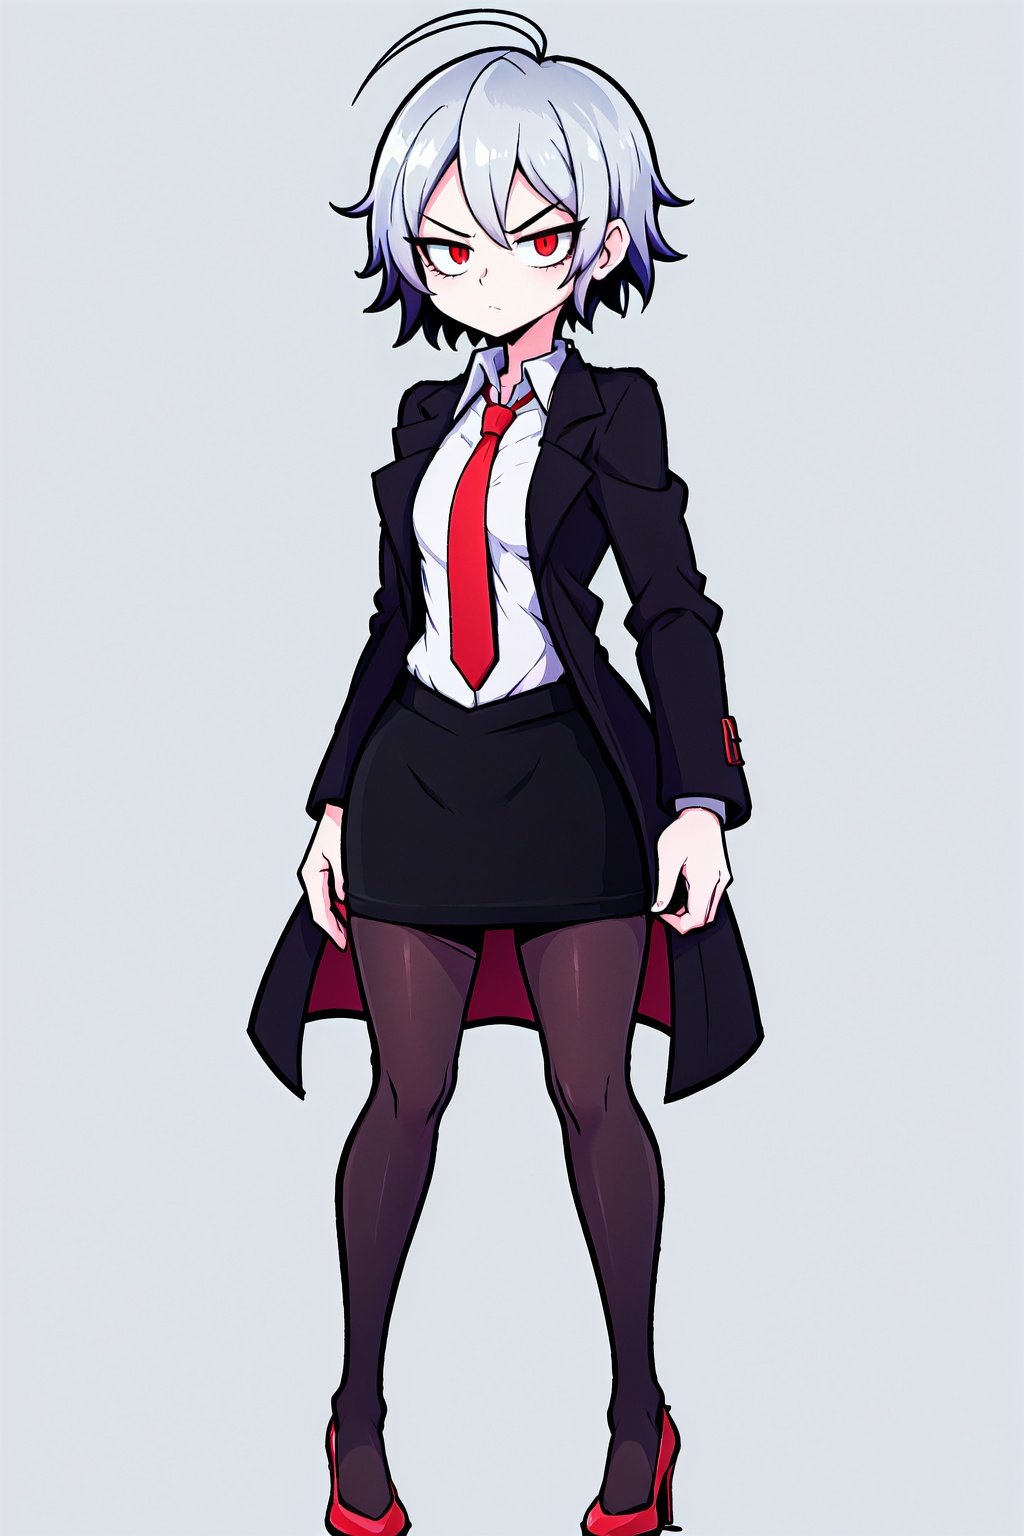 Best quality, 1girl, cup cut, silver hair, hair clips, red eyes, neutral expression, looking at viewer, black coat, red formal tie, black pencil skirt, black tights, red heels, standing, simple background, perfect lighting, full body, mid shot